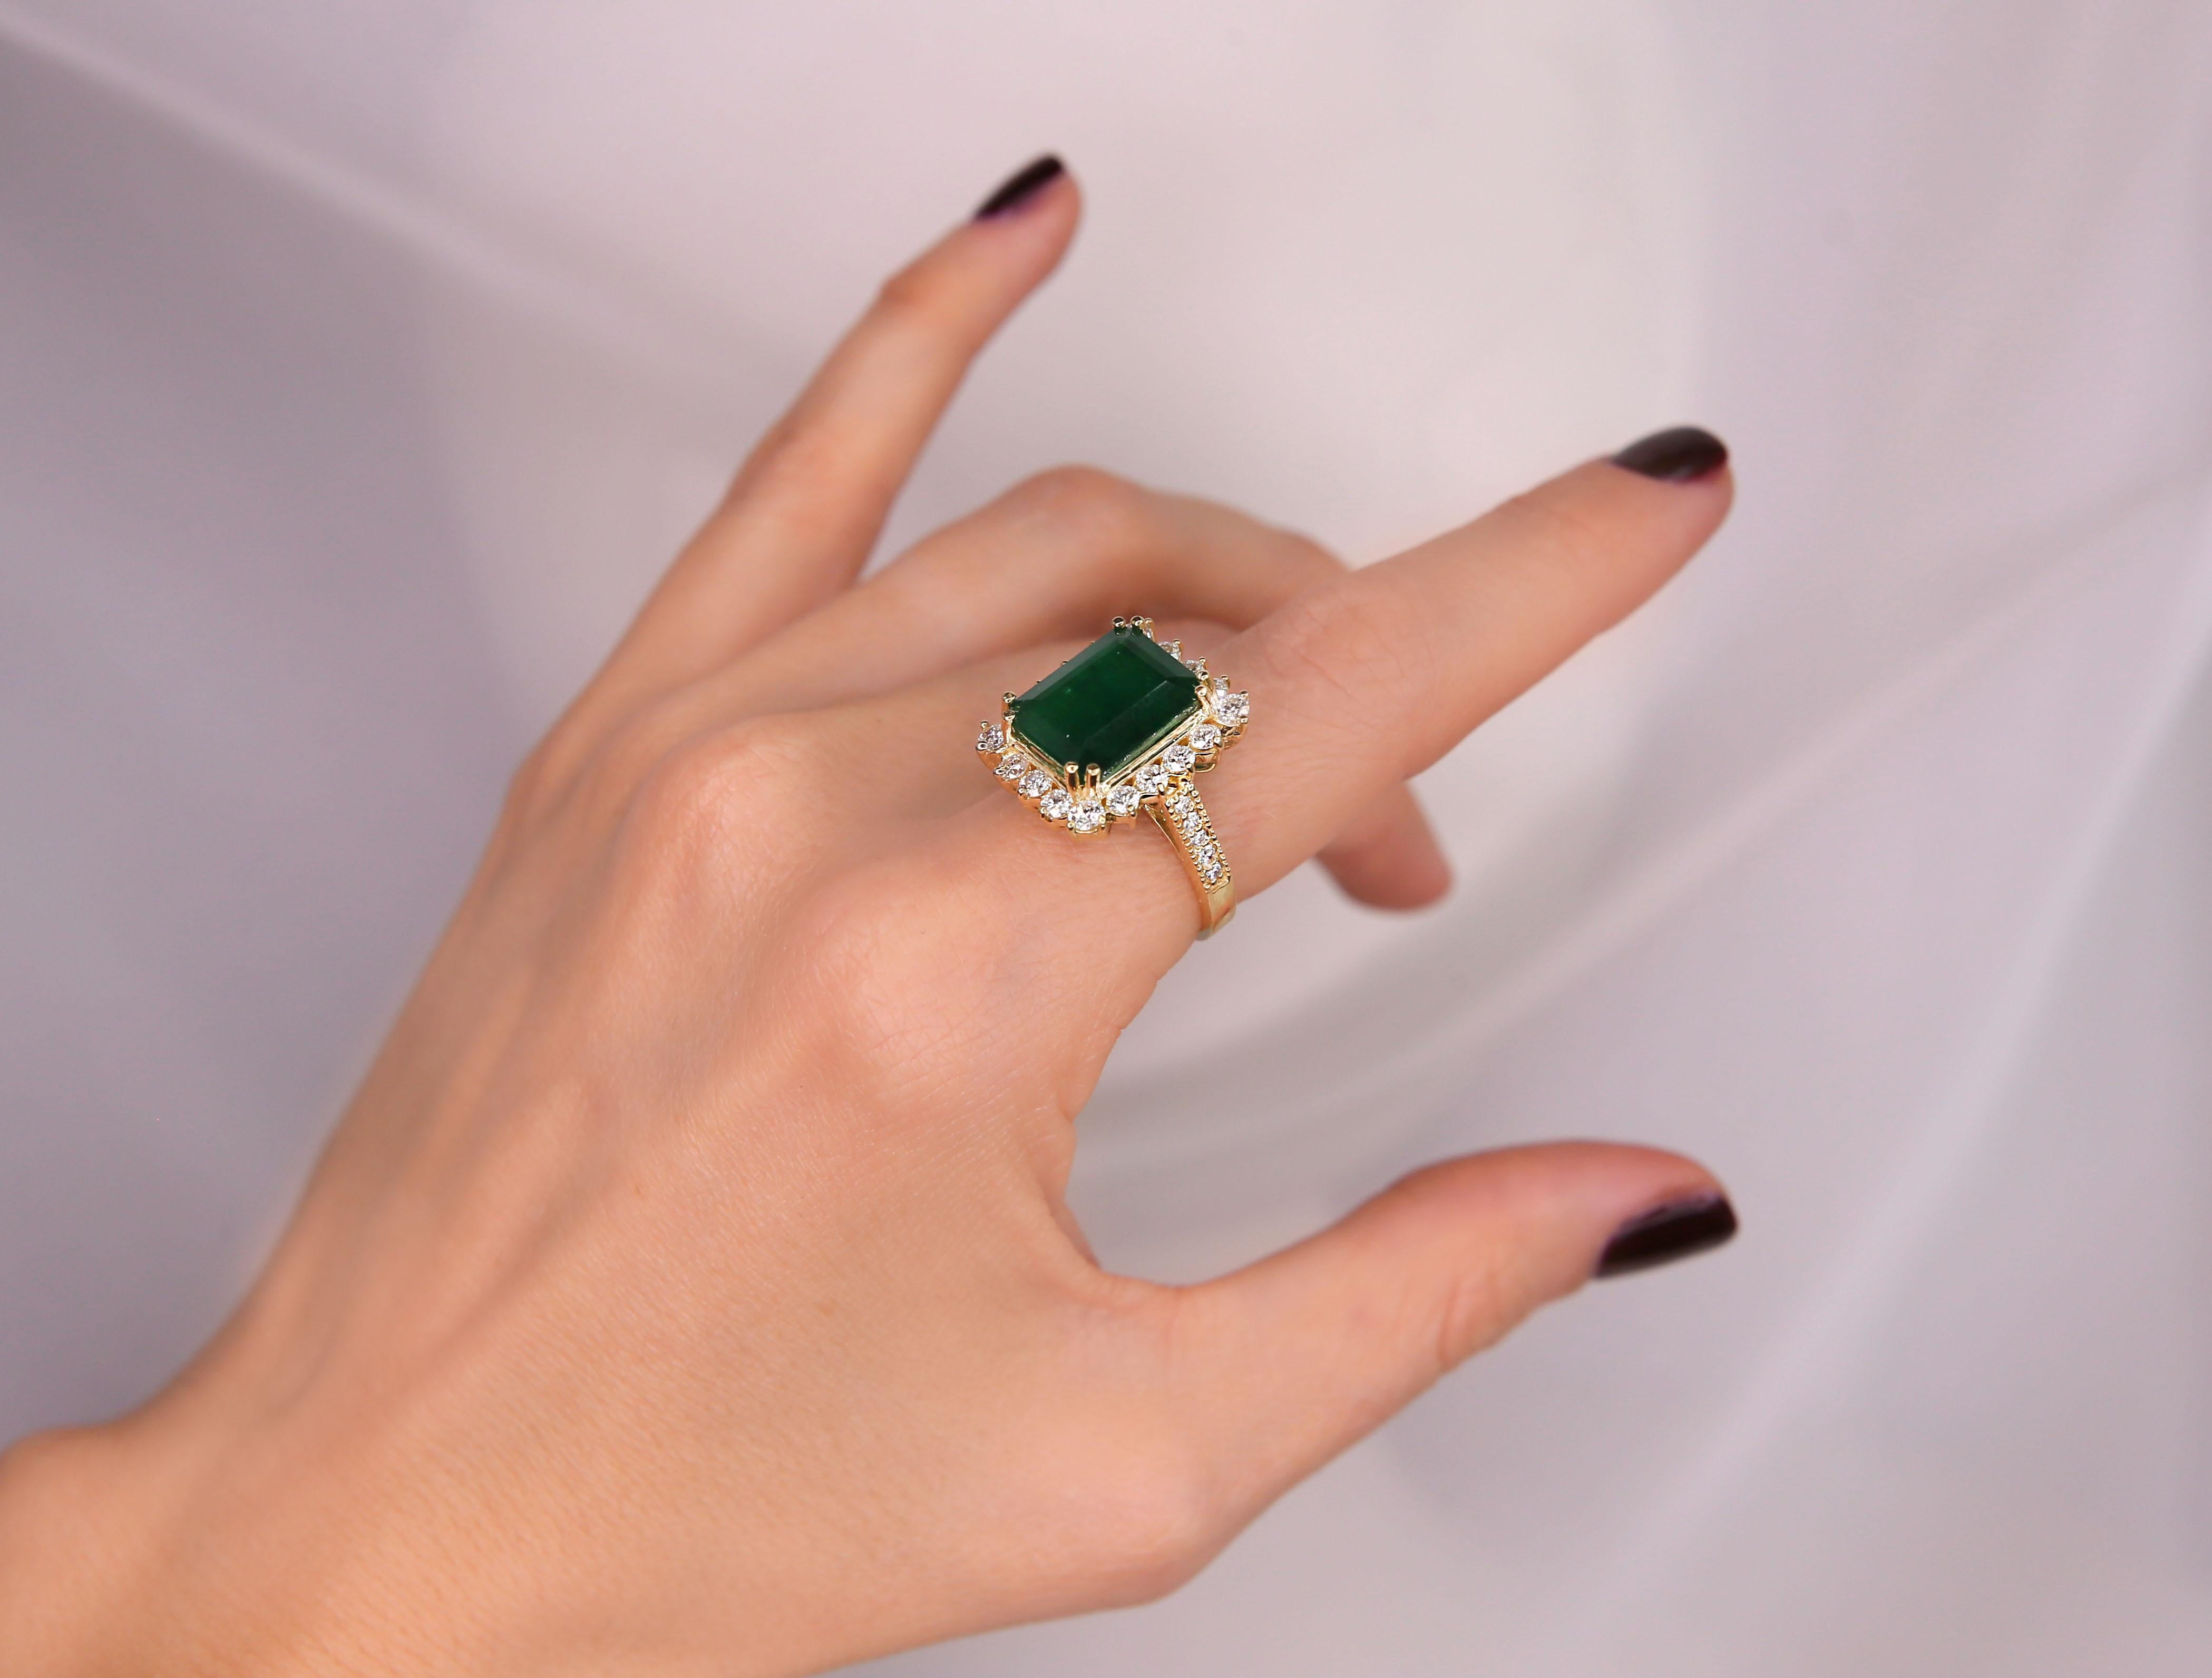 6.91 CTW Emerald 18K Yellow Gold Diamond Ring
Stamped: 18K
Total Ring Weight: 9.2 Grams
Emerald Weight: 5.51 Carat (13.00x11.00 Millimeters)
Diamond Weight: 1.40 Carat (F-G Color, VS2-SI1 Clarity )
Face Measures: 19.20x16.30 Millimeters